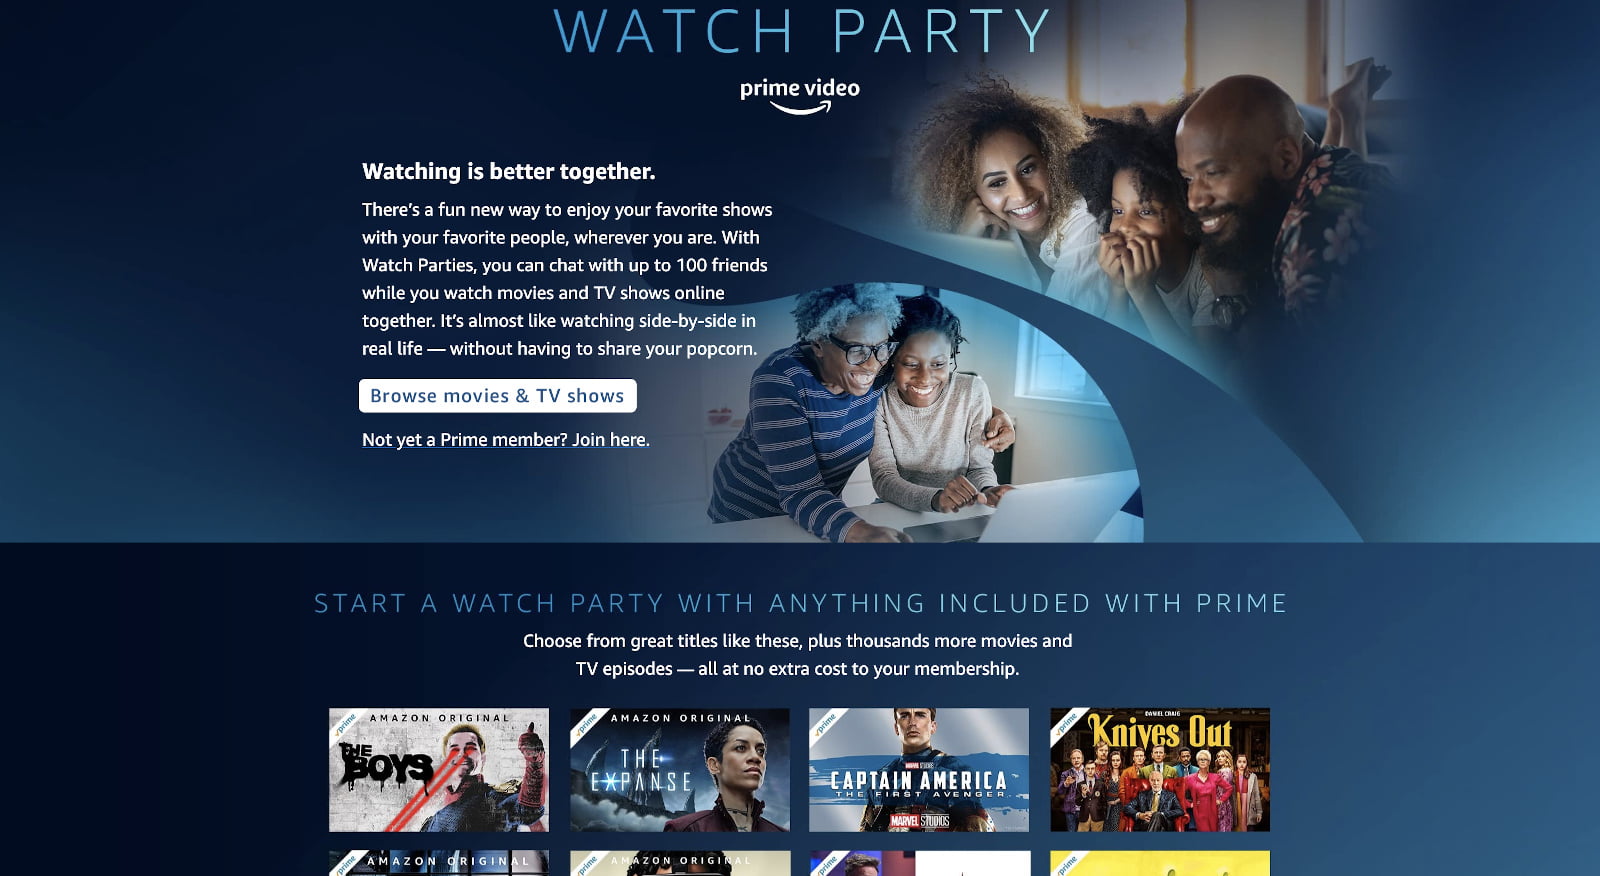 Watch Party feature is introduced for Amazon Prime Video